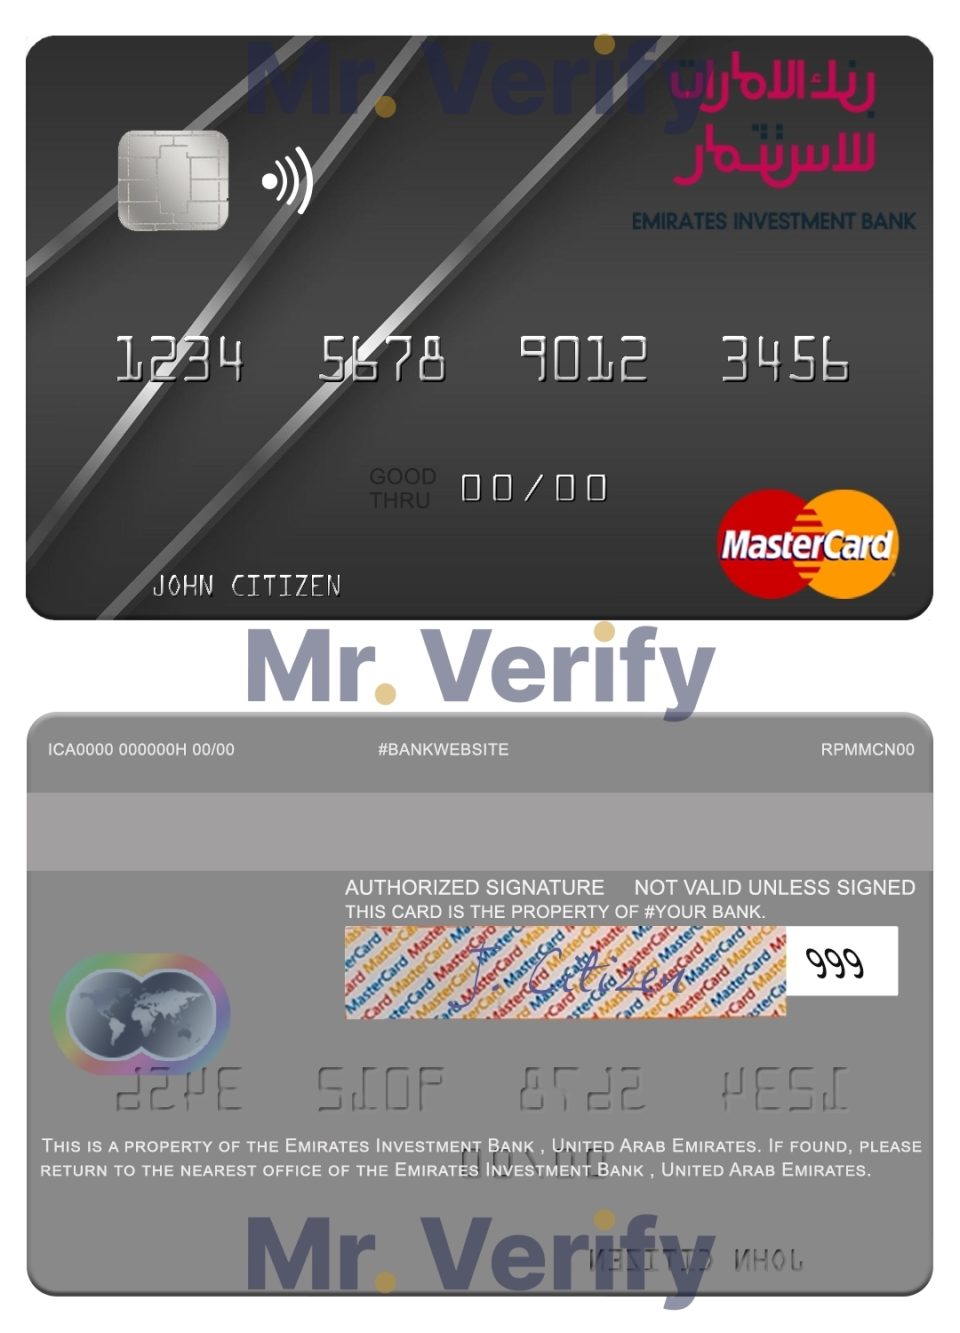 Editable United Arab Emirates Emirates Investment Bank mastercard Templates in PSD Format